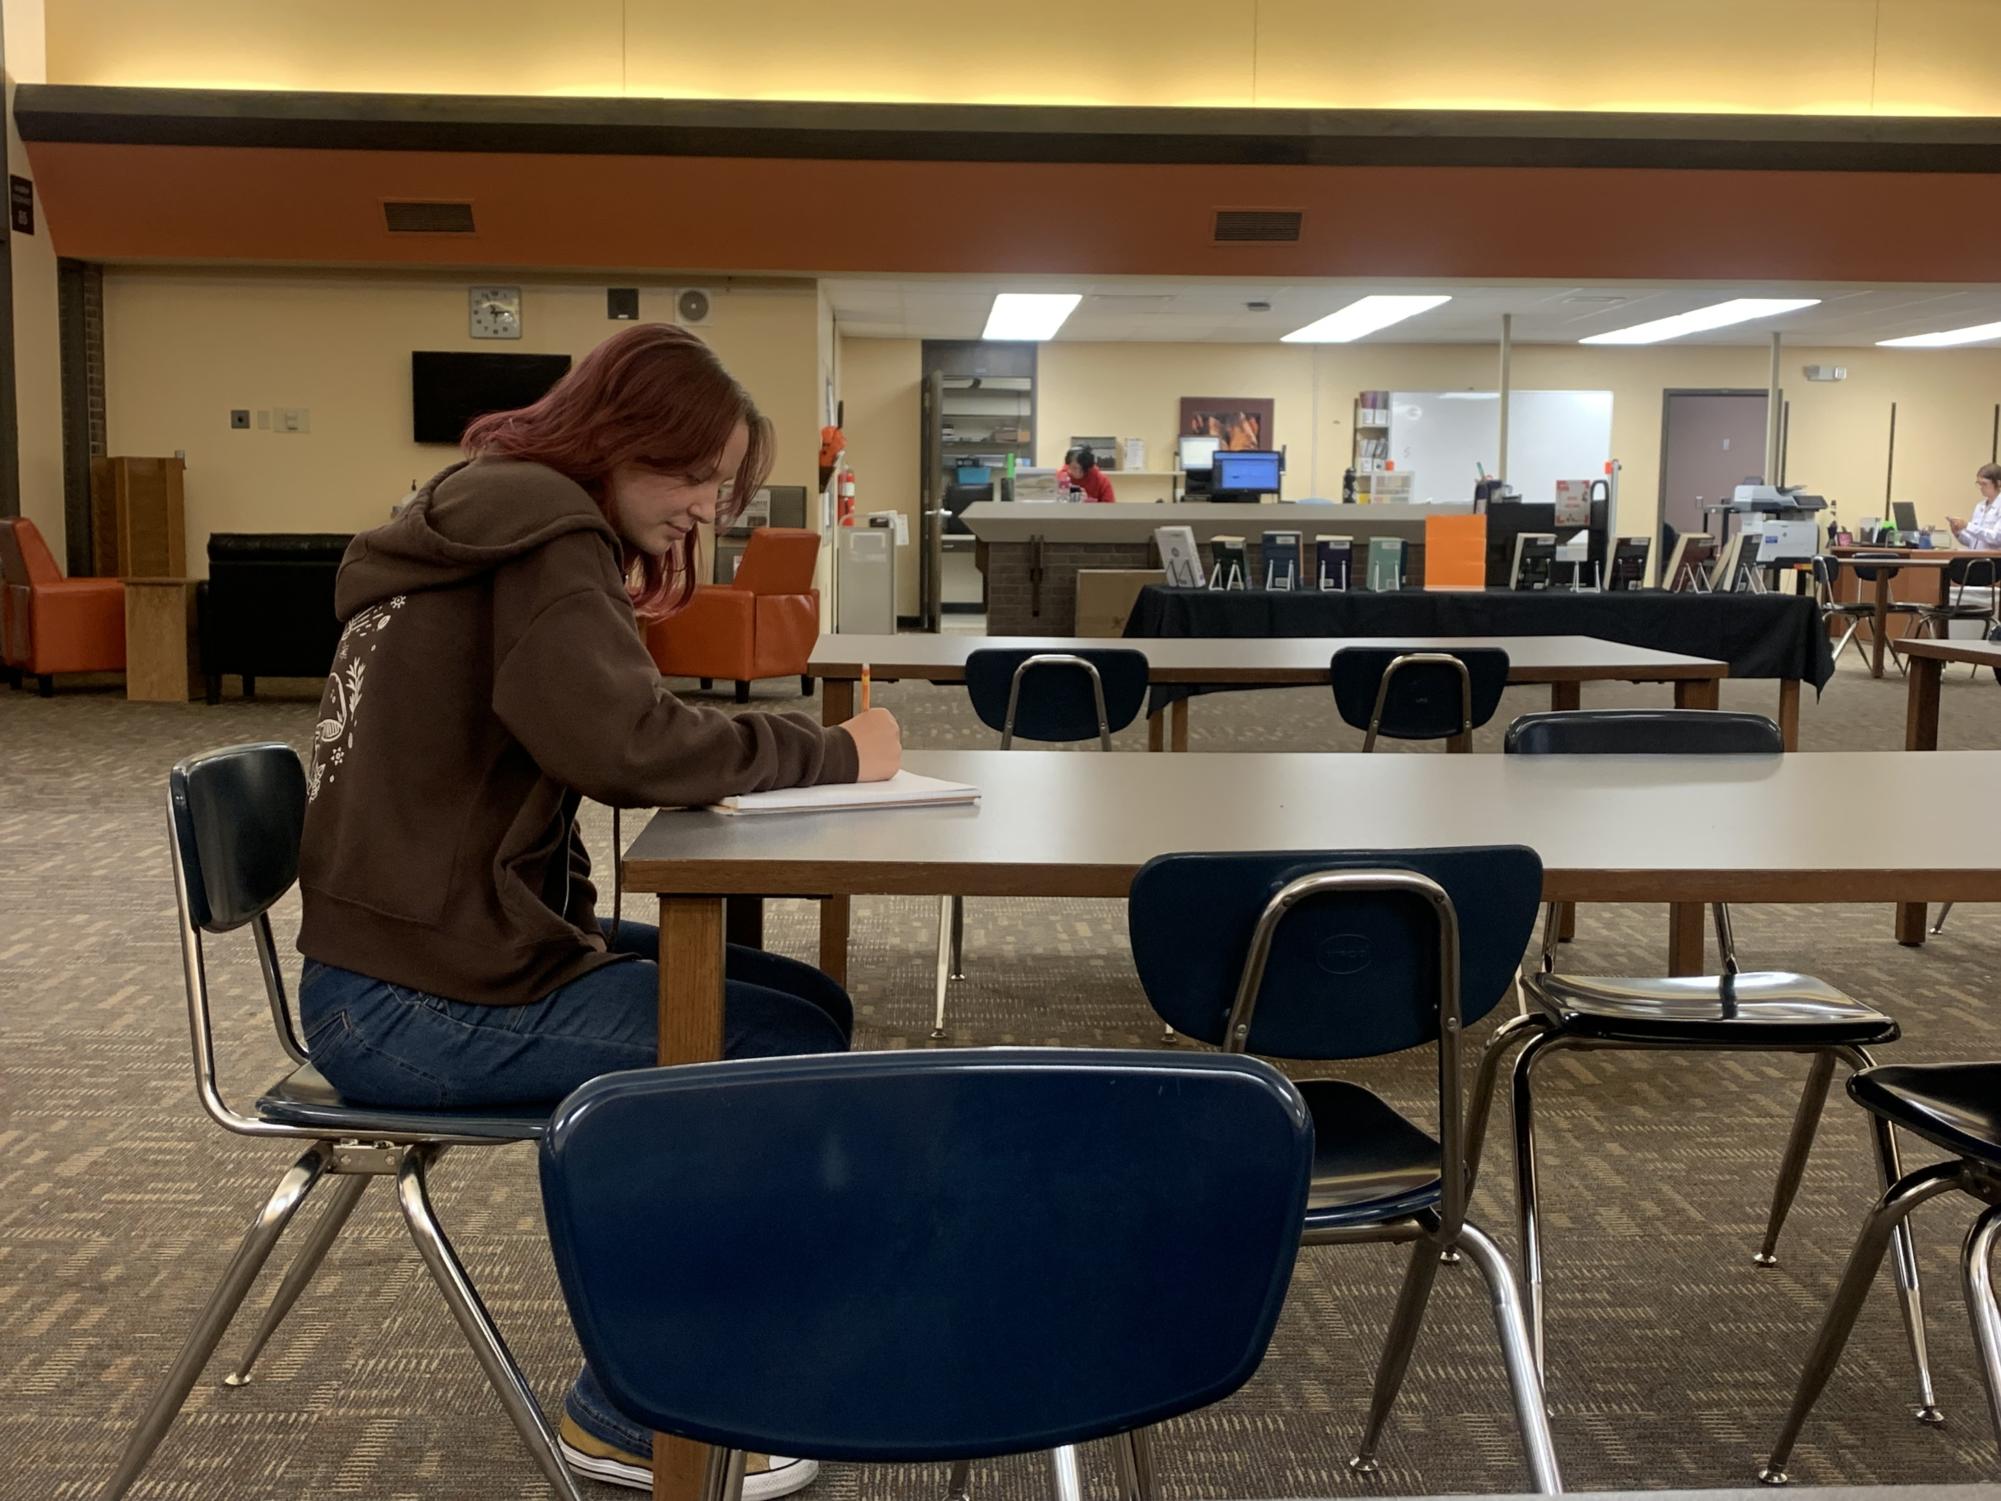 Sophomore Gabrielle Wilson studies Spanish in the library during Ace. She often comes in to study in the library rather than stay in her classroom. “It is a more quiet and comfortable environment,” Wilson said.